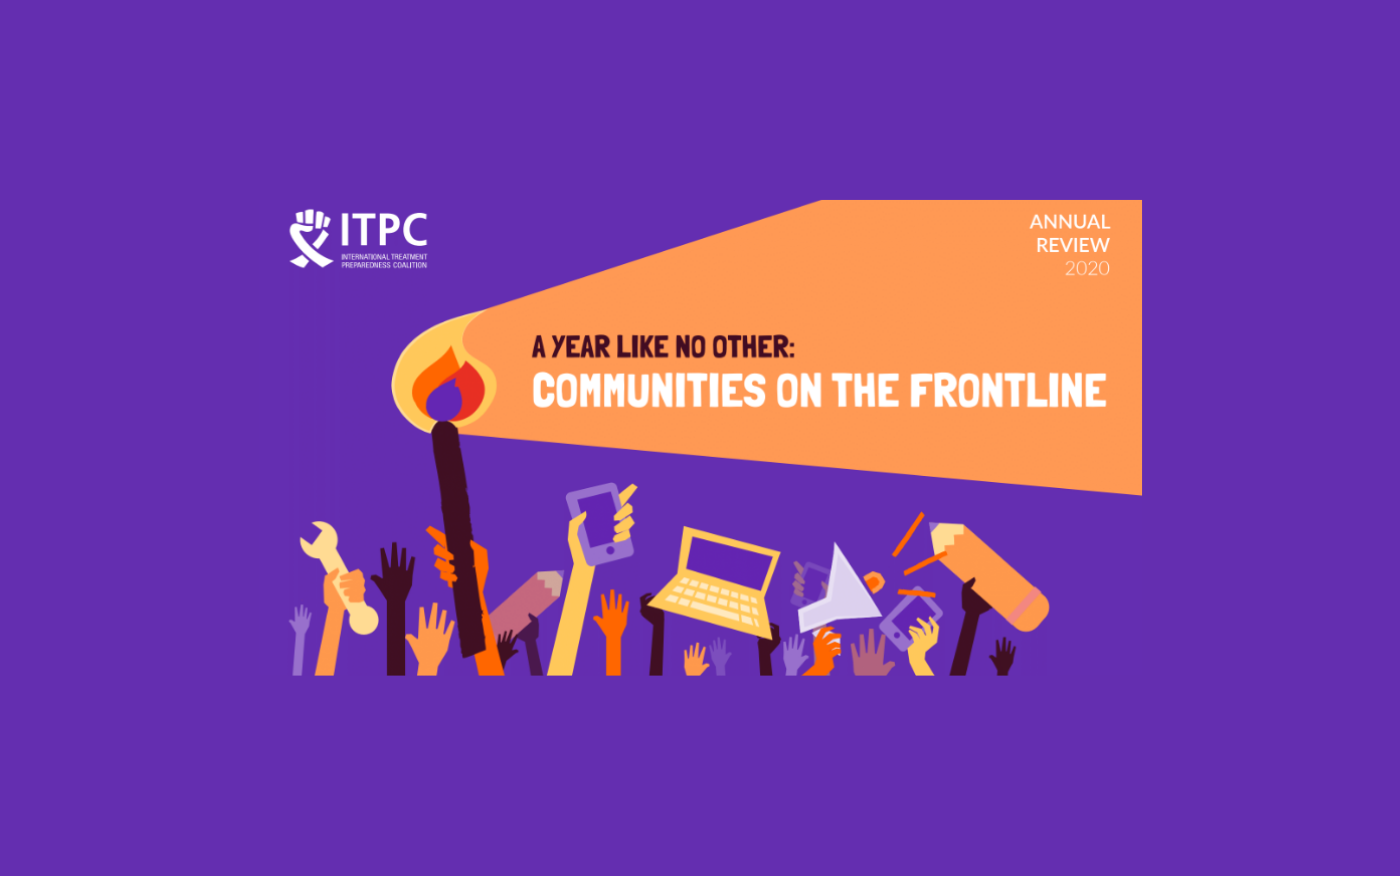 ITPC Global Annual Review 2020